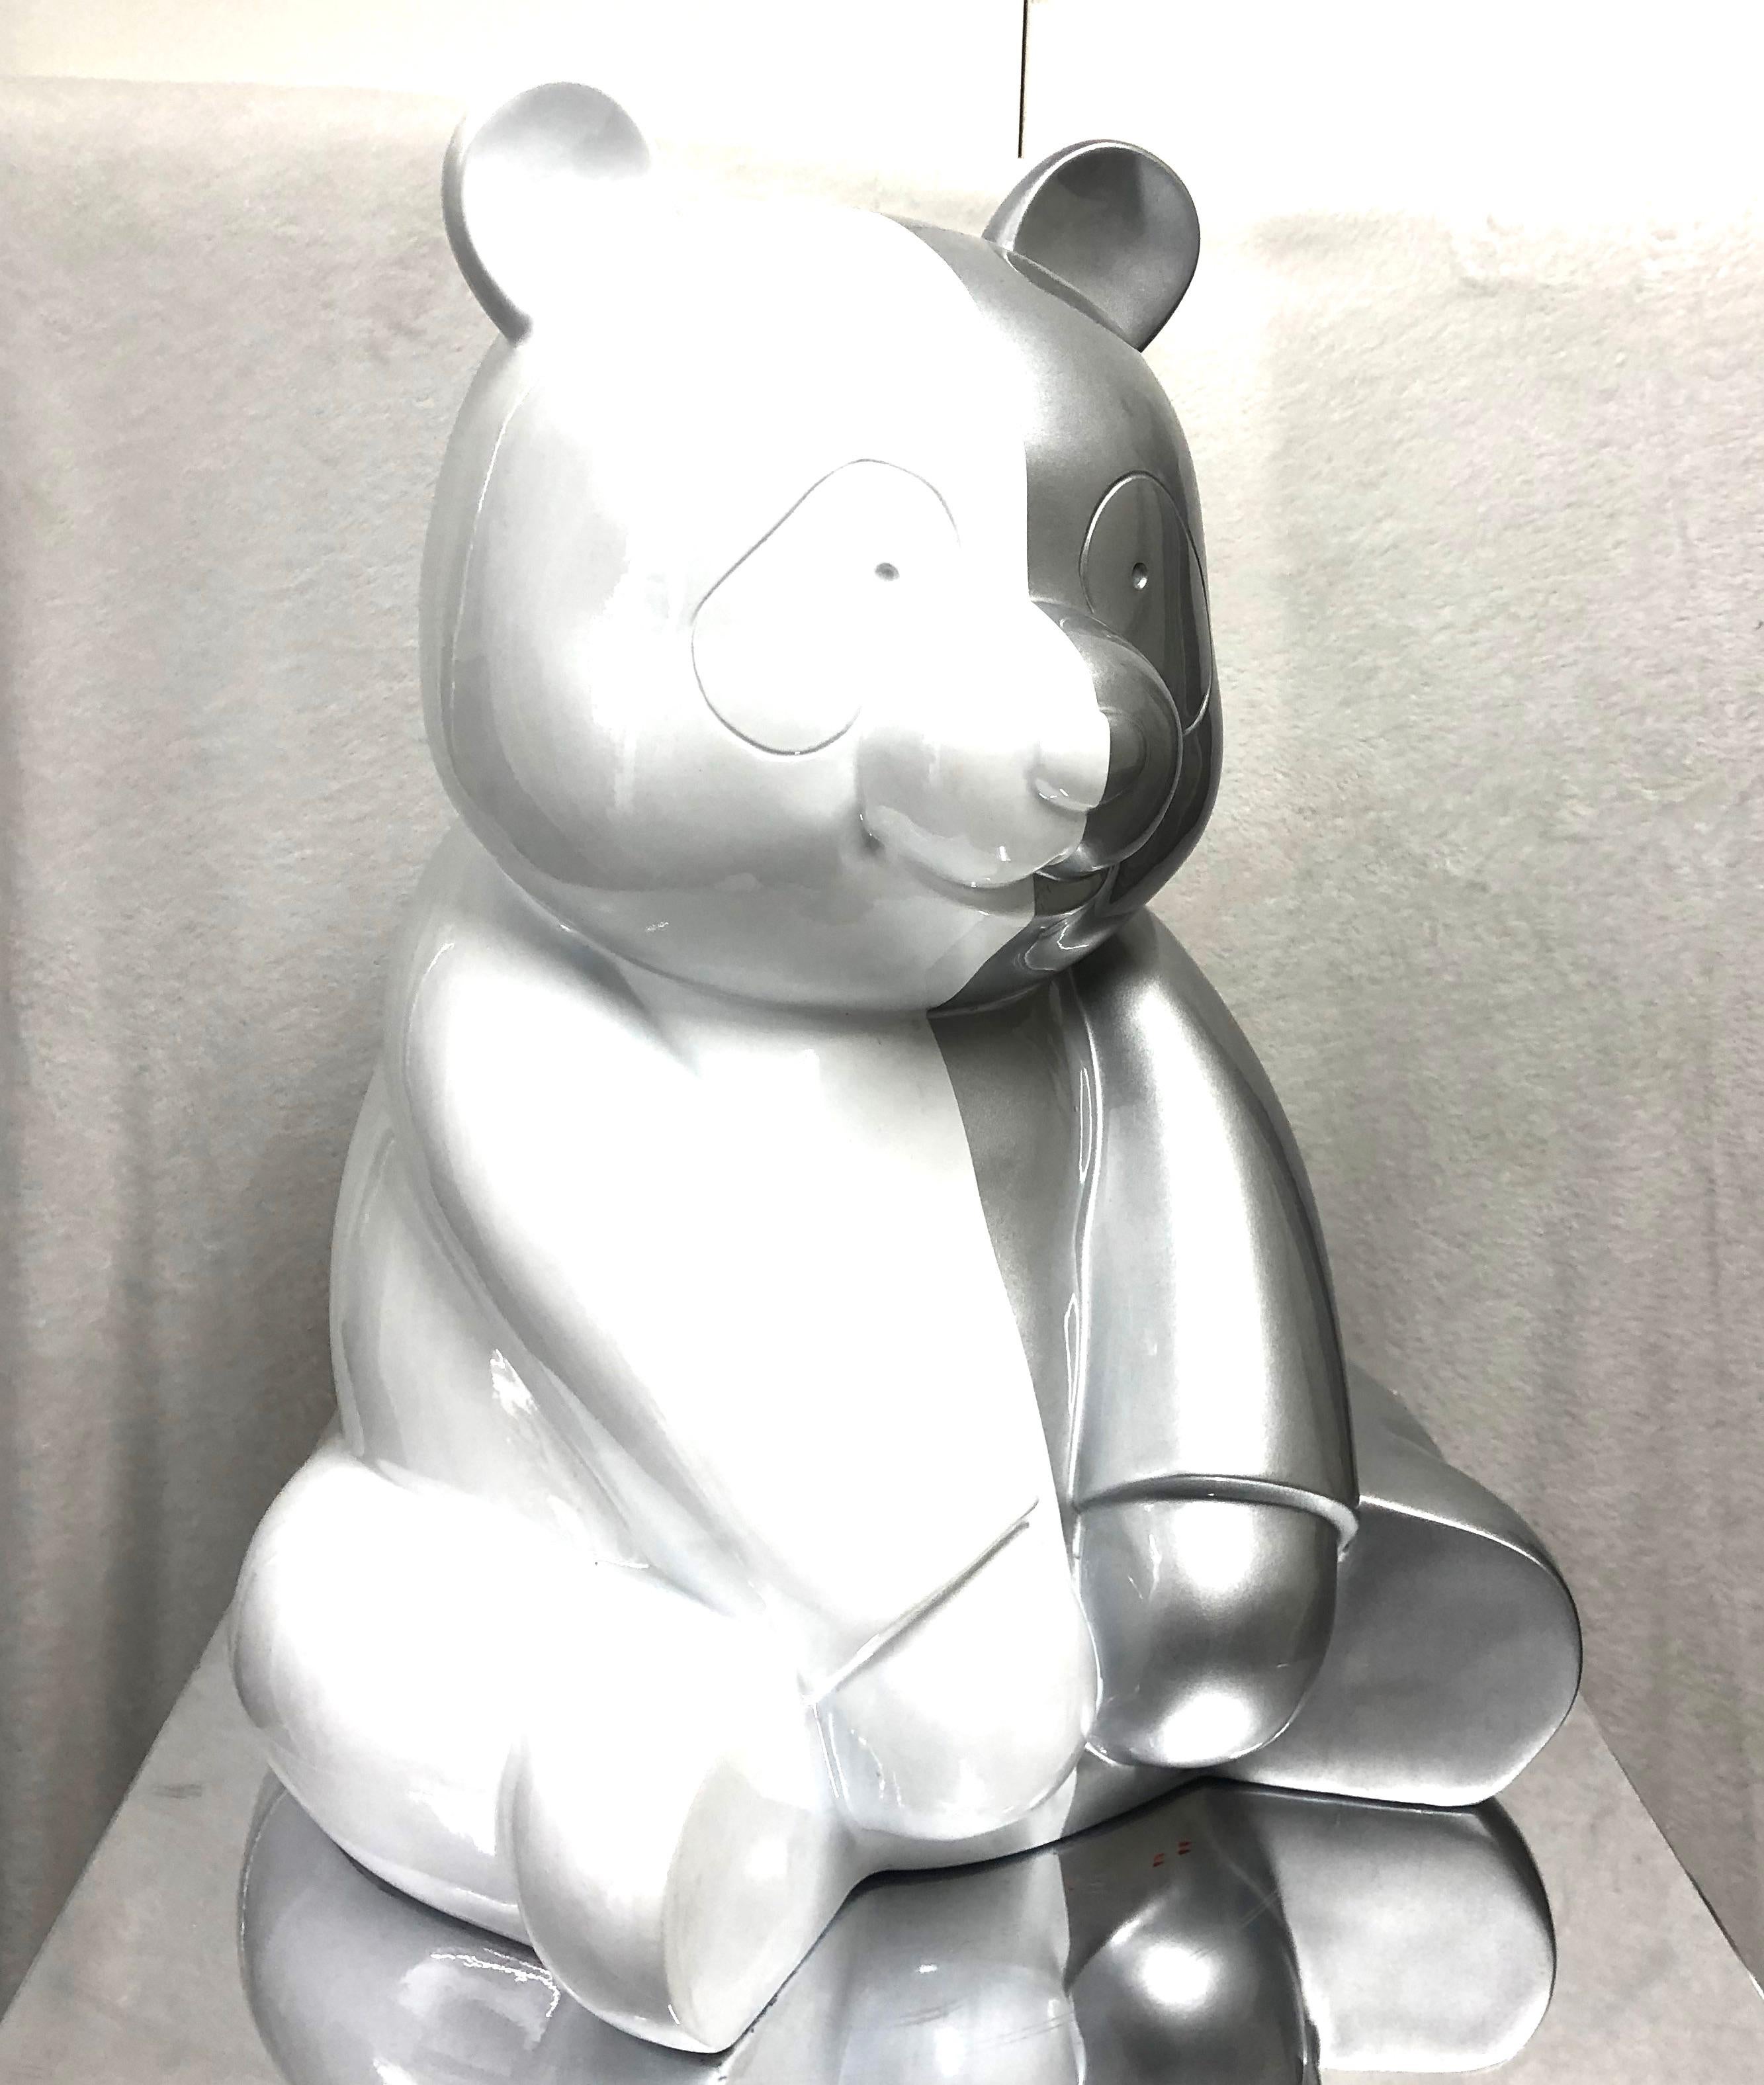 The United Pandasan  : Spectral Symmetry Silver & White - Contemporary Sculpture by HIRO ANDO